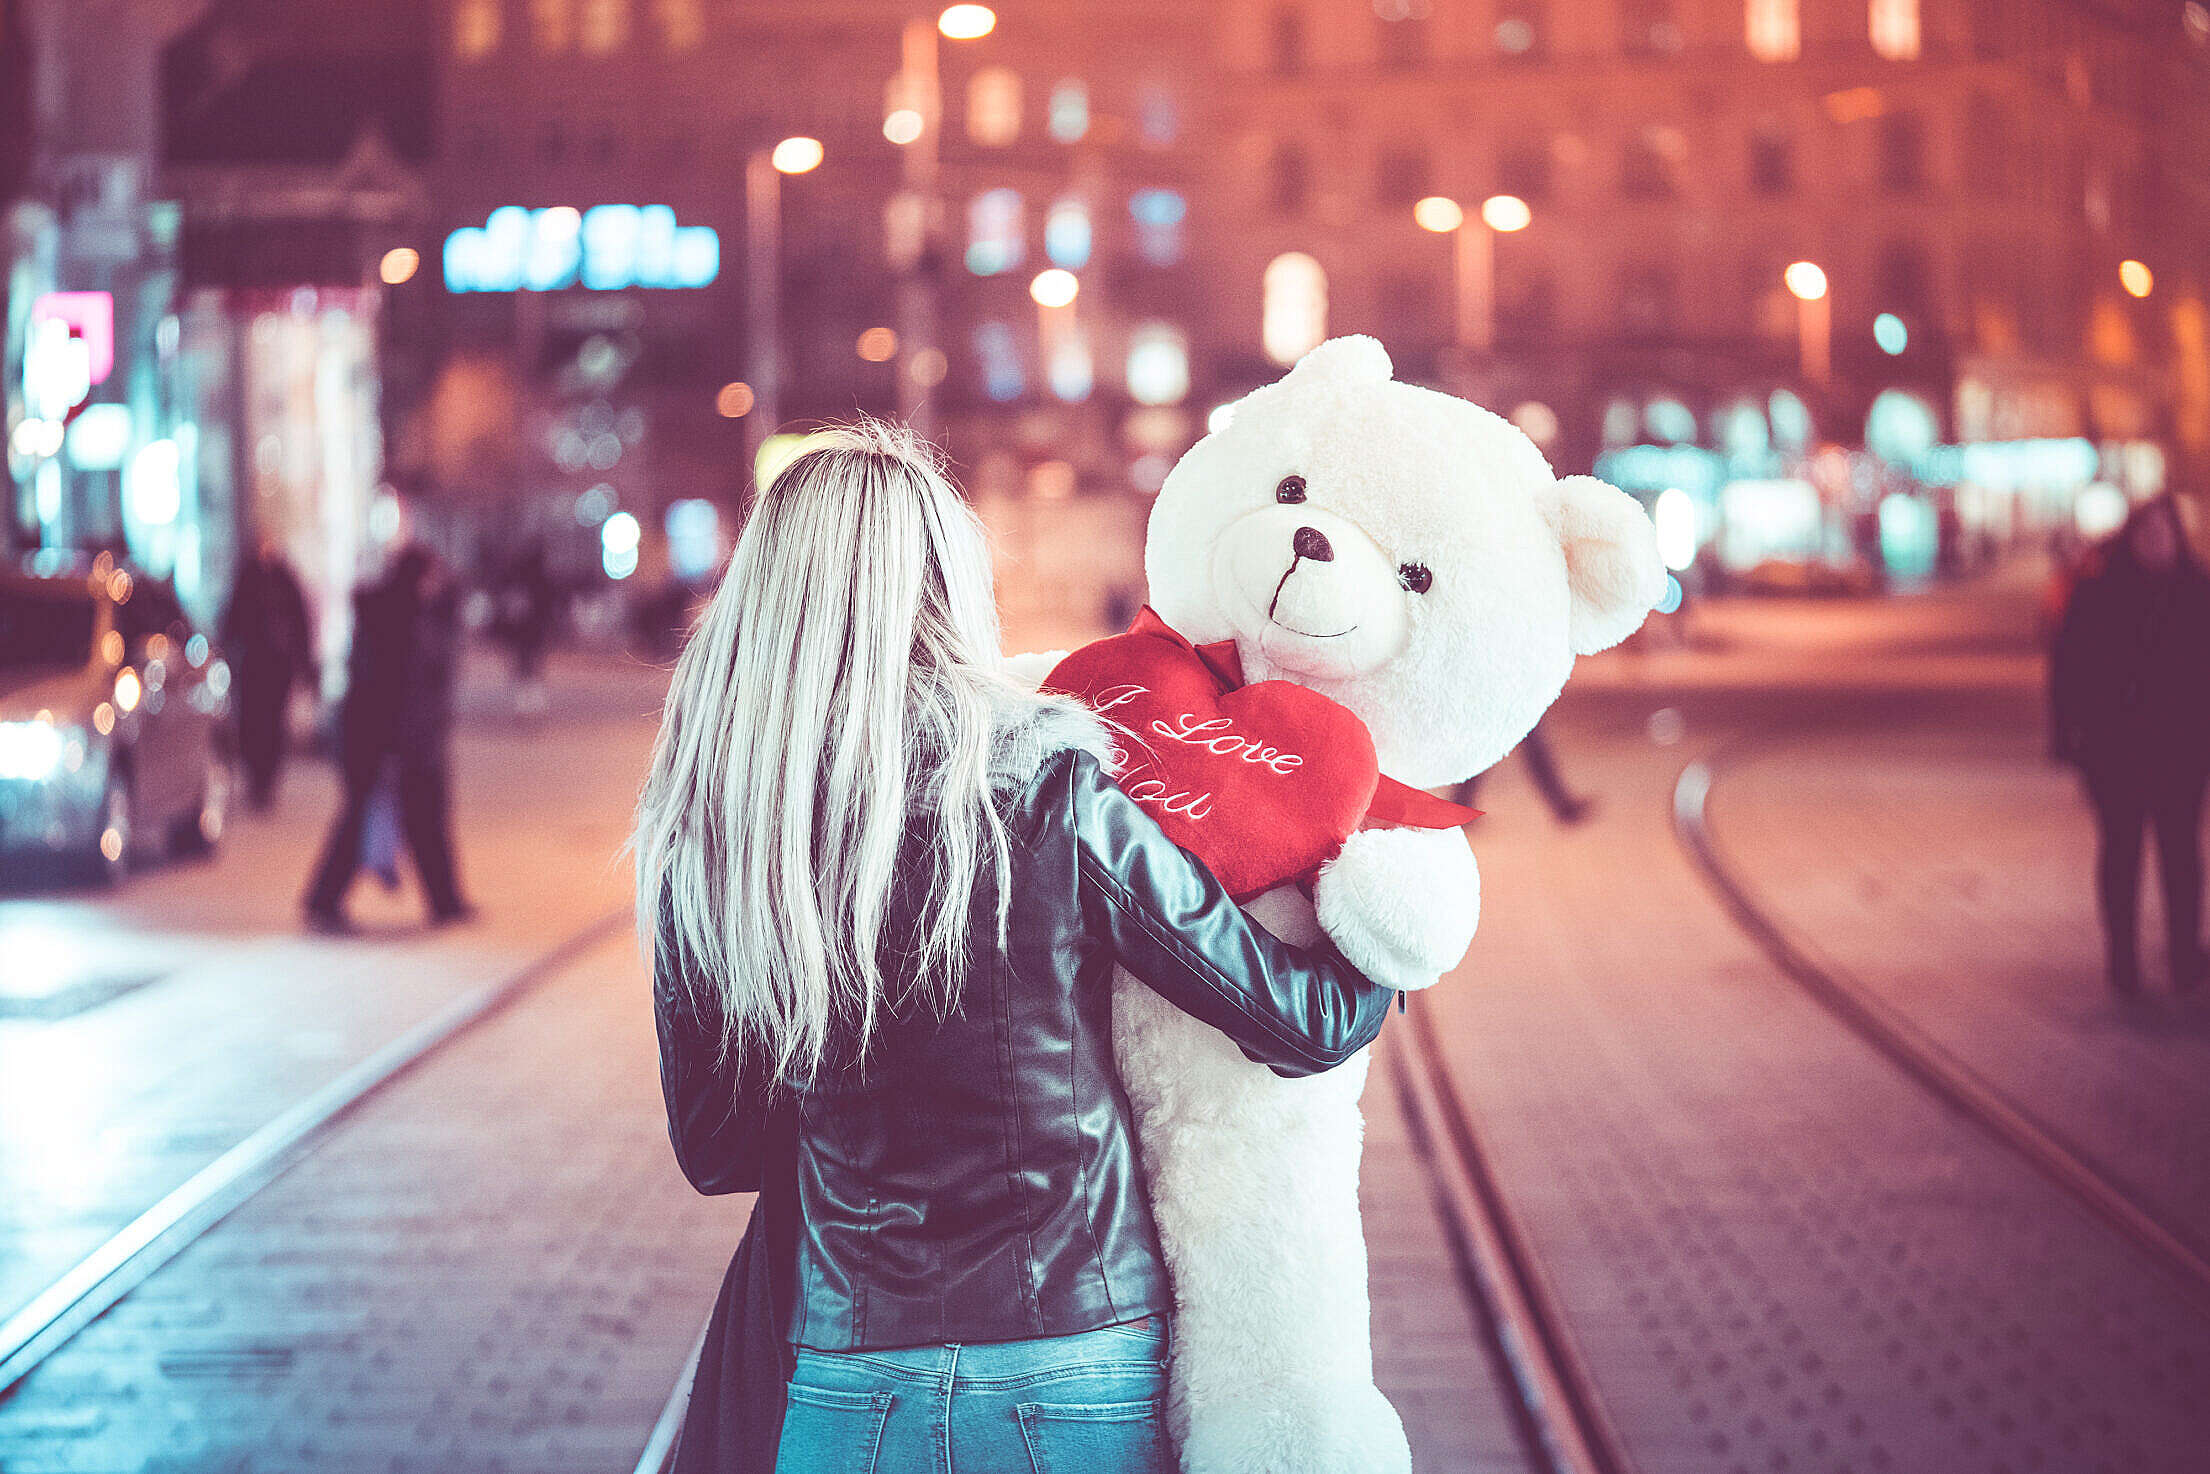 Young Woman Walking with a Big Teddy Bear at Night Free Stock Photo